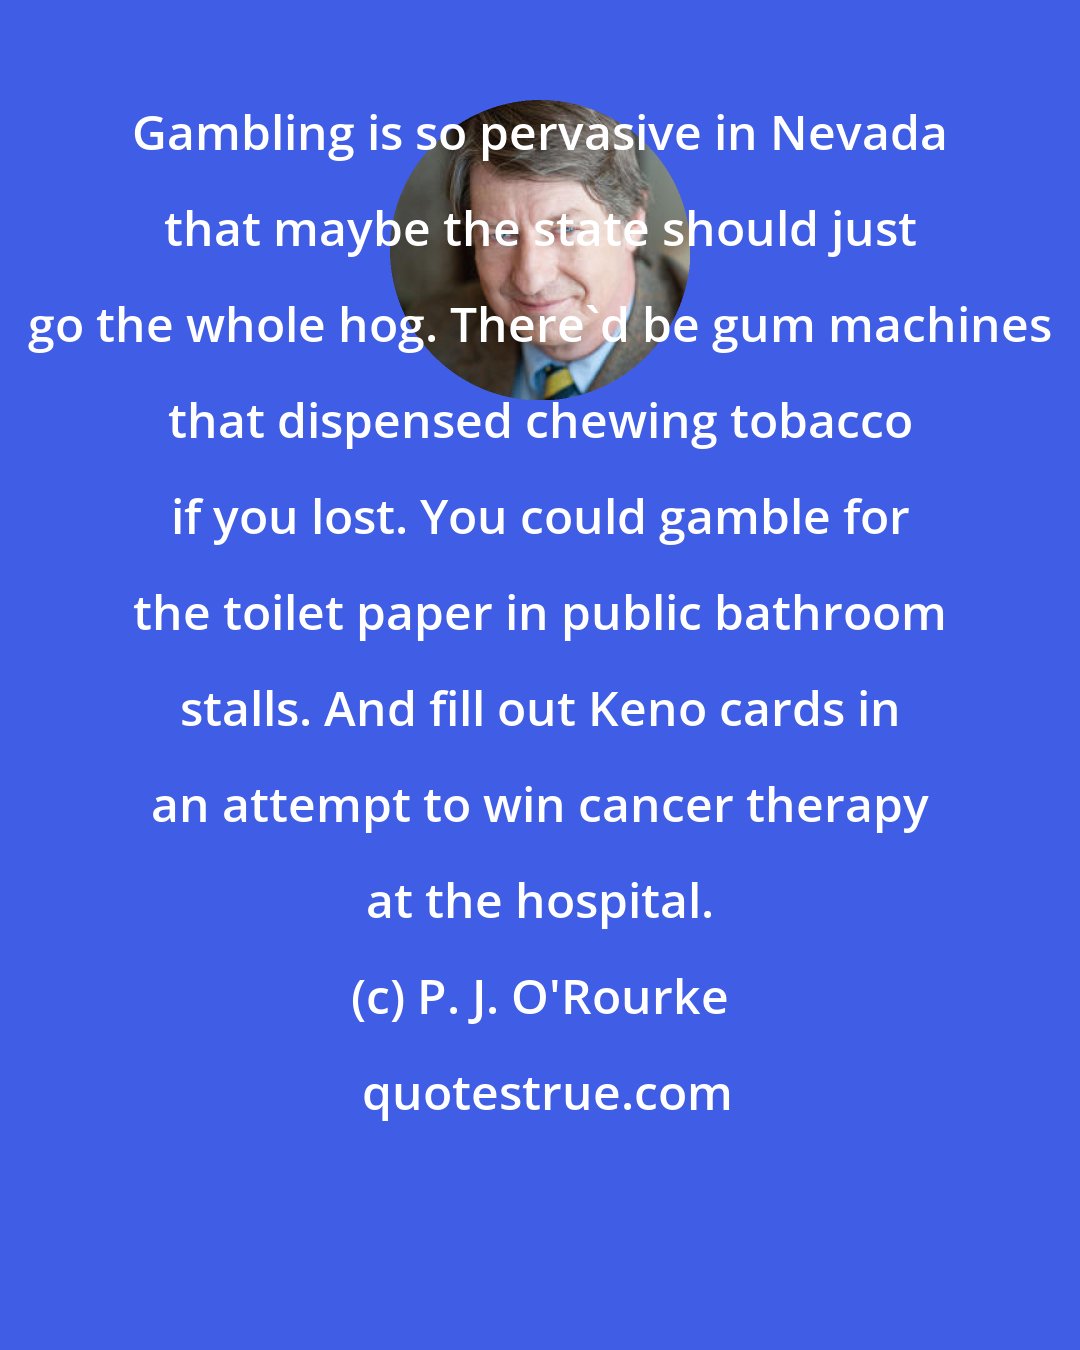 P. J. O'Rourke: Gambling is so pervasive in Nevada that maybe the state should just go the whole hog. There'd be gum machines that dispensed chewing tobacco if you lost. You could gamble for the toilet paper in public bathroom stalls. And fill out Keno cards in an attempt to win cancer therapy at the hospital.